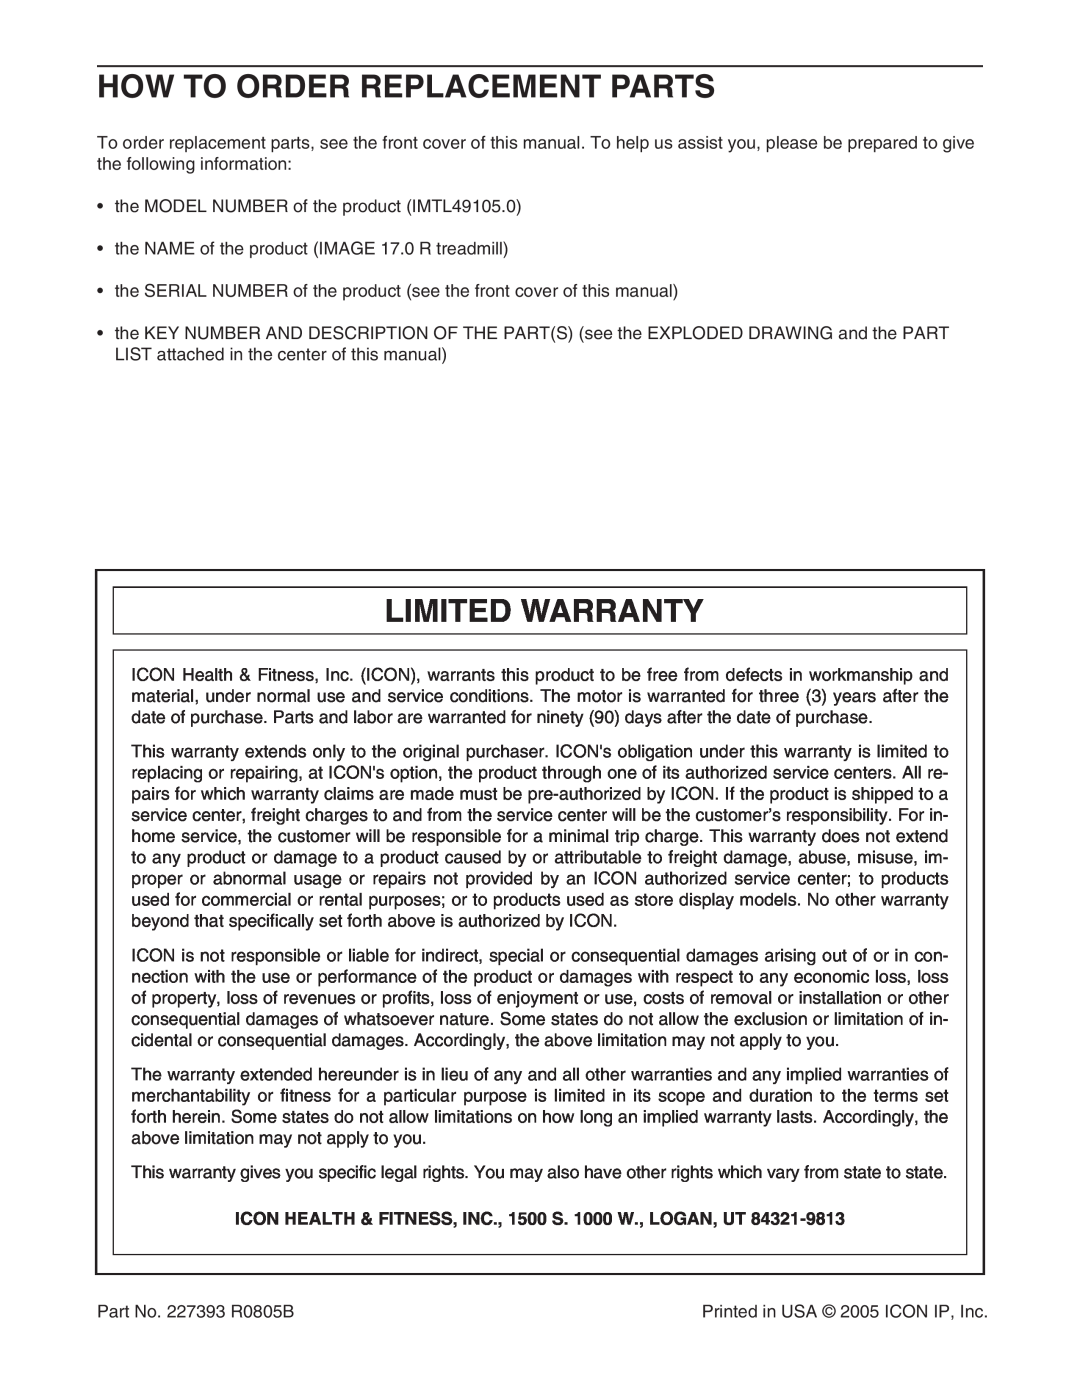 Image IMTL49105.0 user manual How To Order Replacement Parts, Limited Warranty 